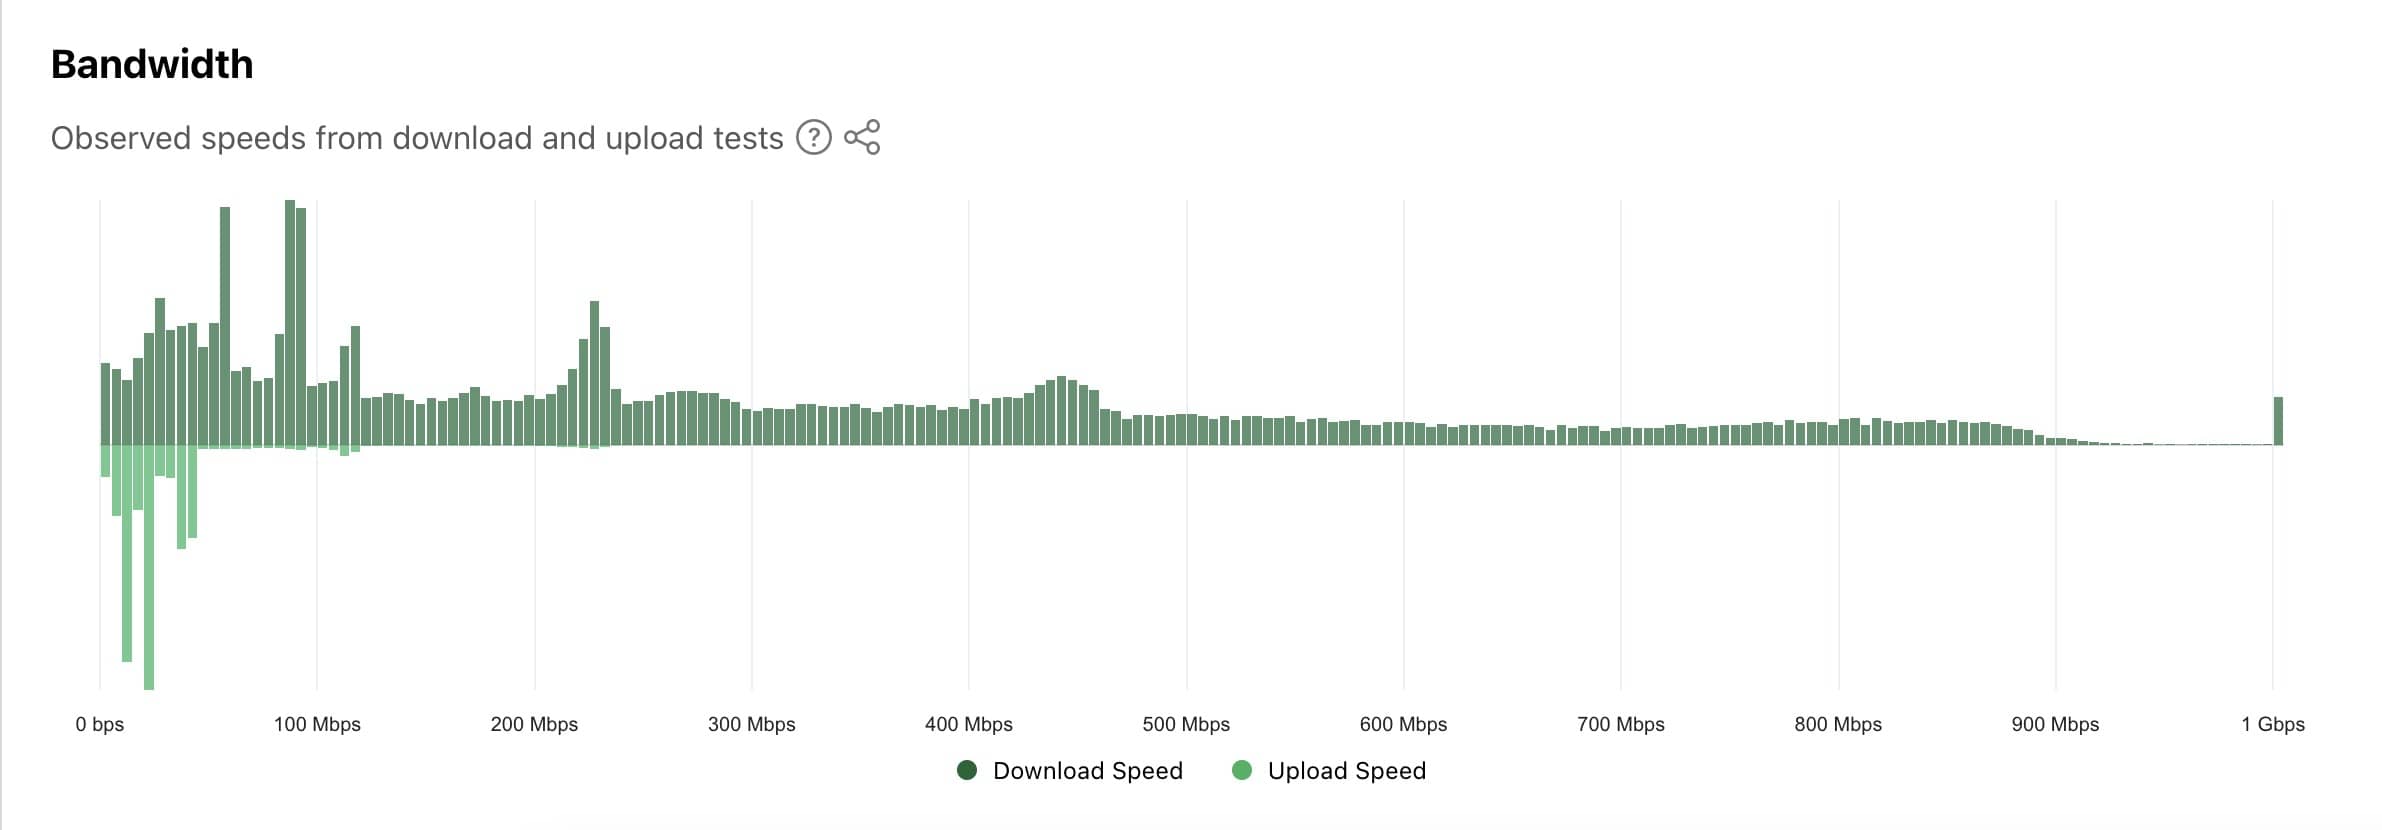 Comcast Bandwith Graph showing Upload and Download Speeds